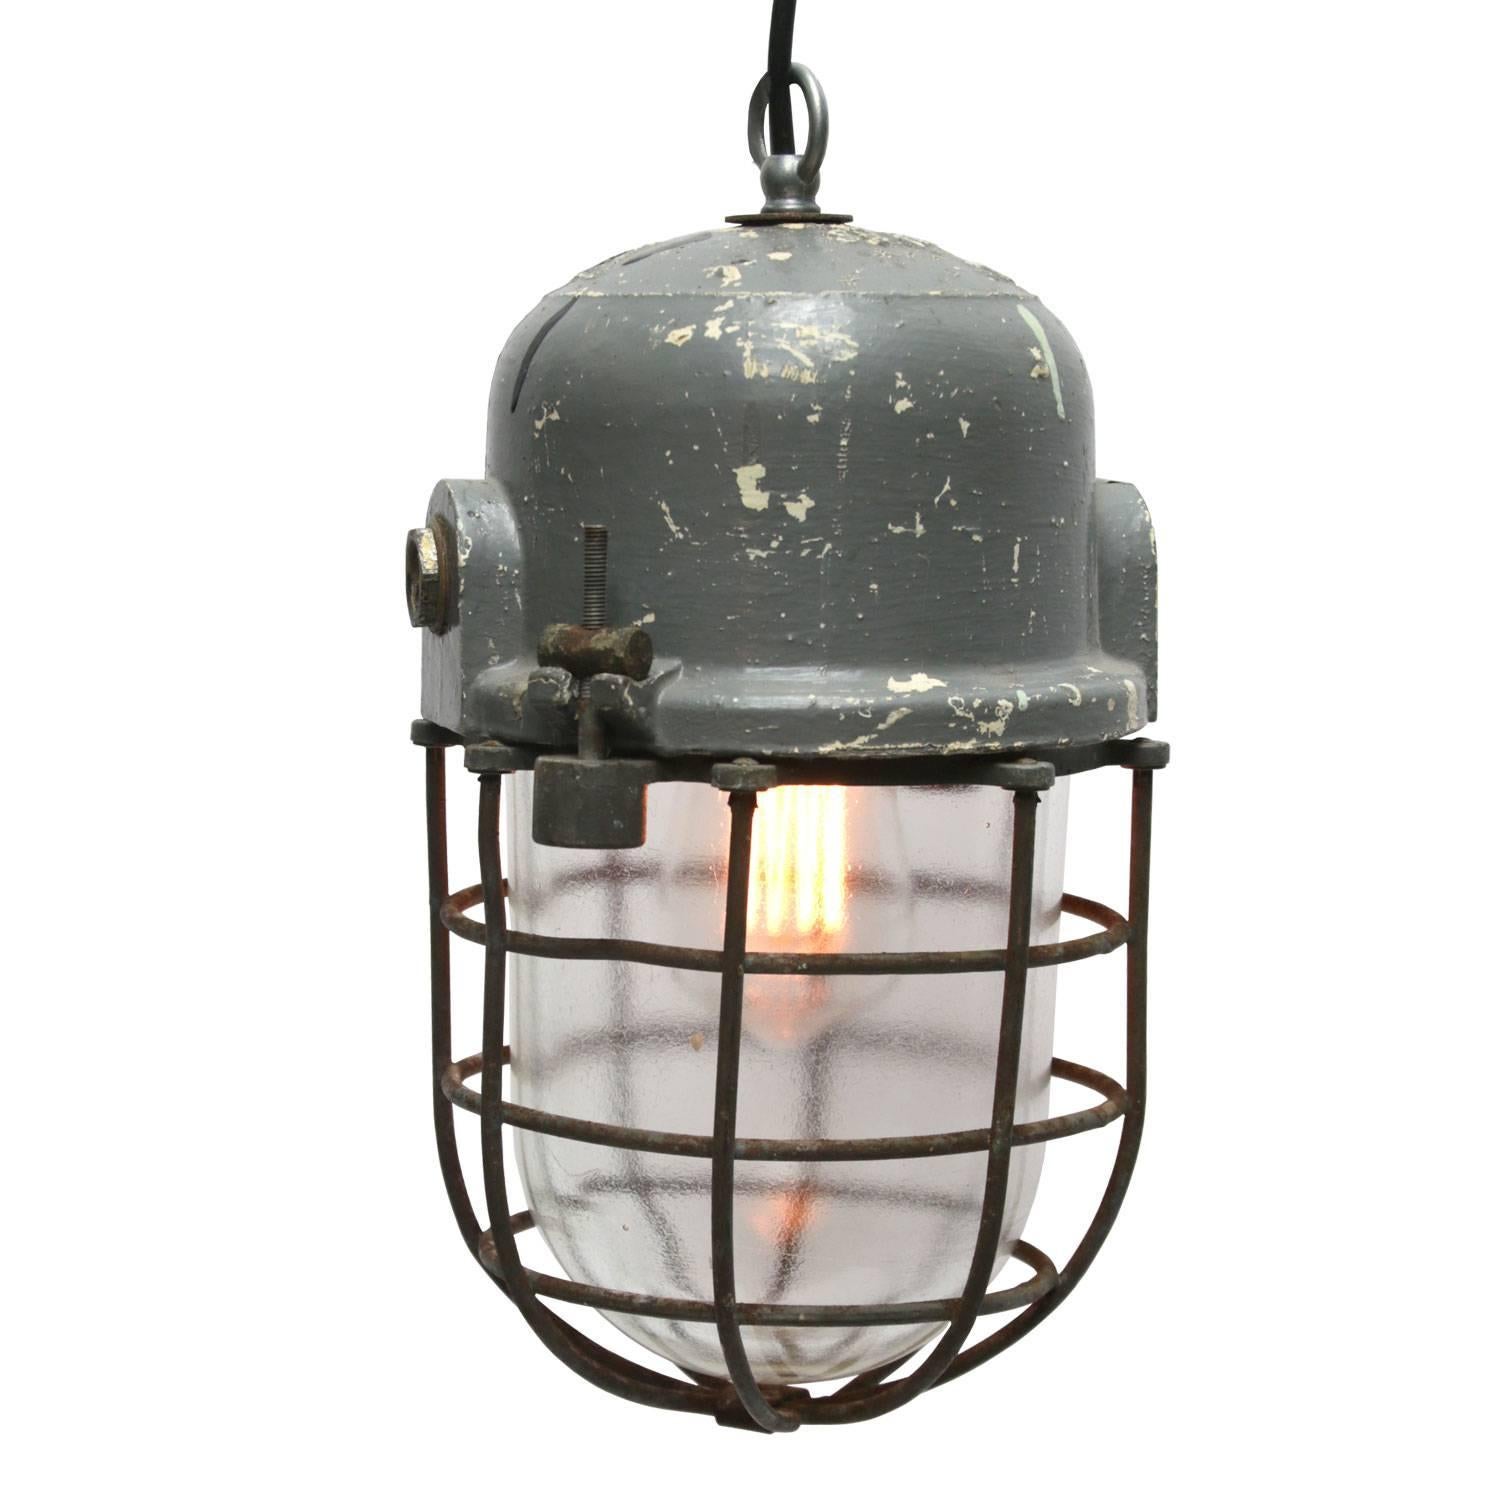 Vintage European Industrial pendant. Cast aluminium top. Clear glass.

Weight: 2.7 kg / 6 lb

All lamps have been made suitable by international standards for incandescent light bulbs, energy-efficient and LED bulbs. E26/E27 bulb holders and new